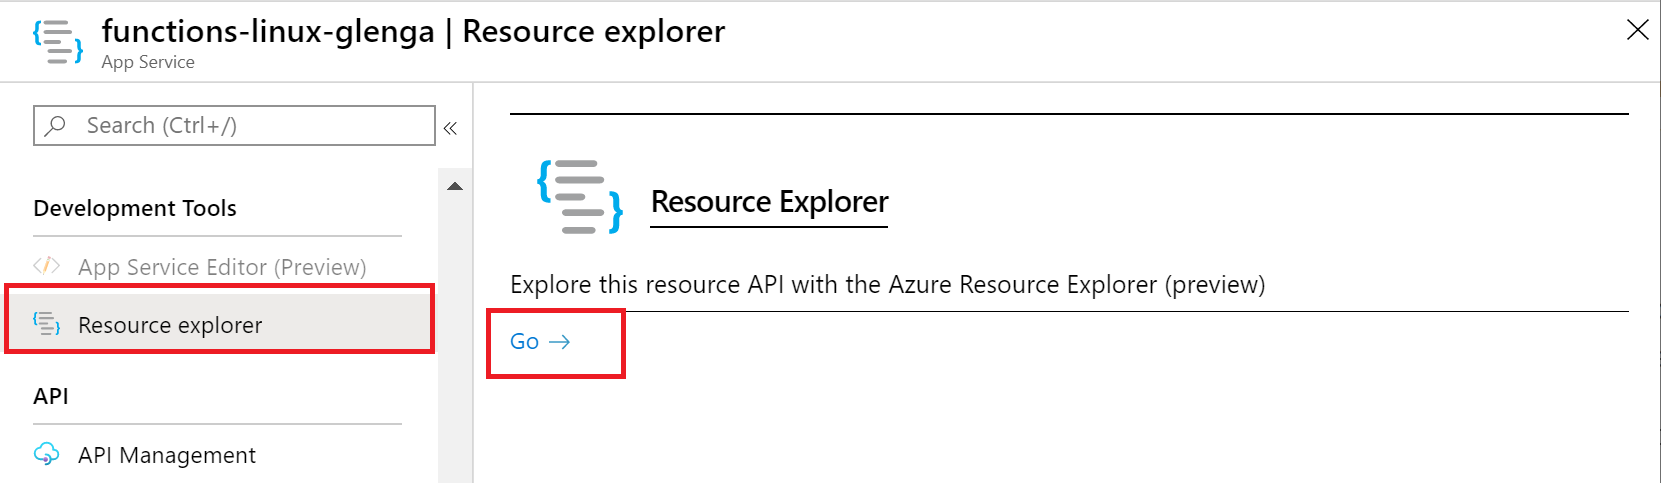 Open the Resource Explorer for the function app in the portal